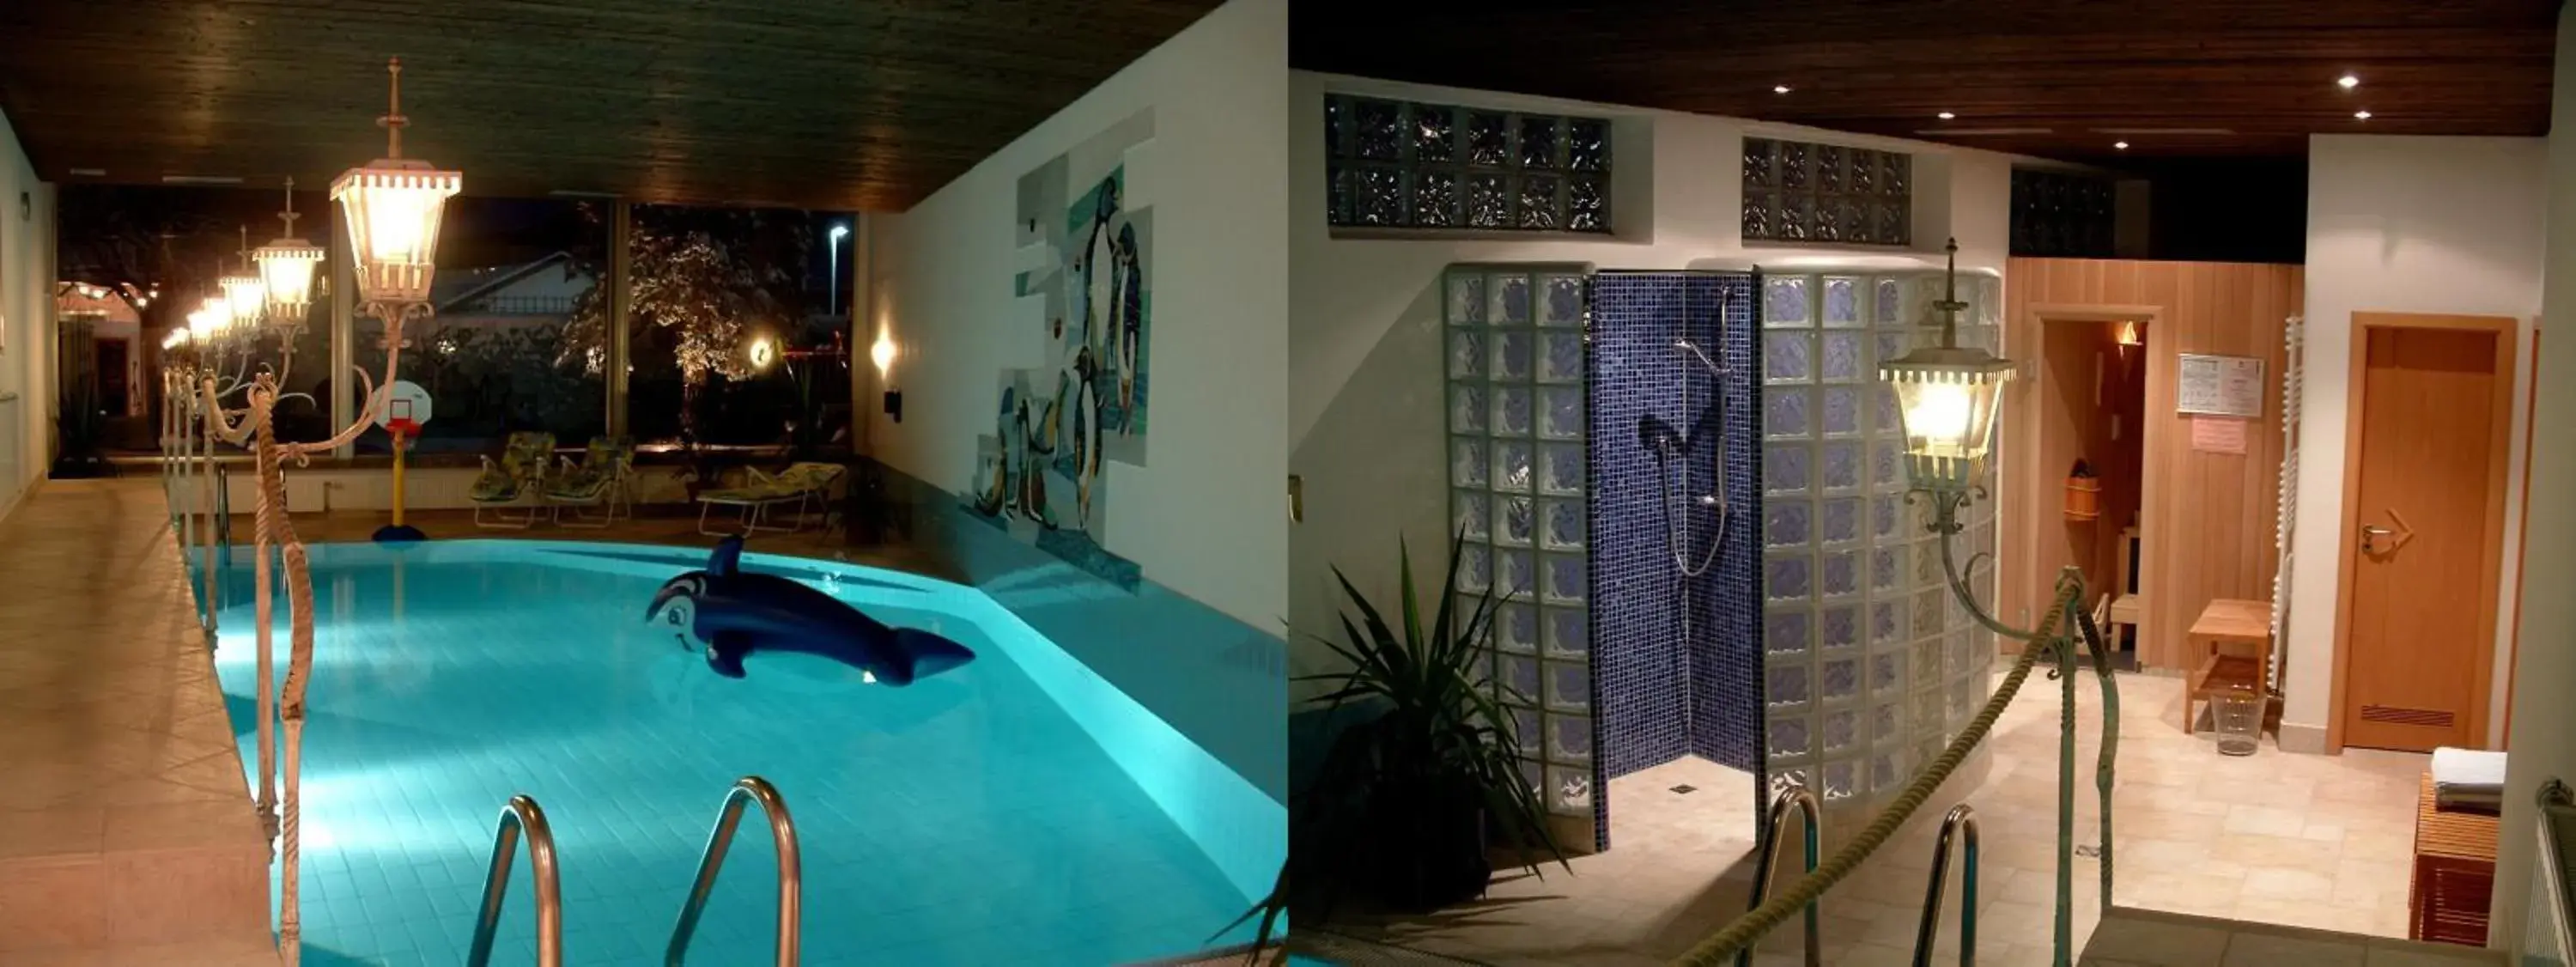 Sauna, Swimming Pool in Hotel Roter Hahn - Bed & Breakfast